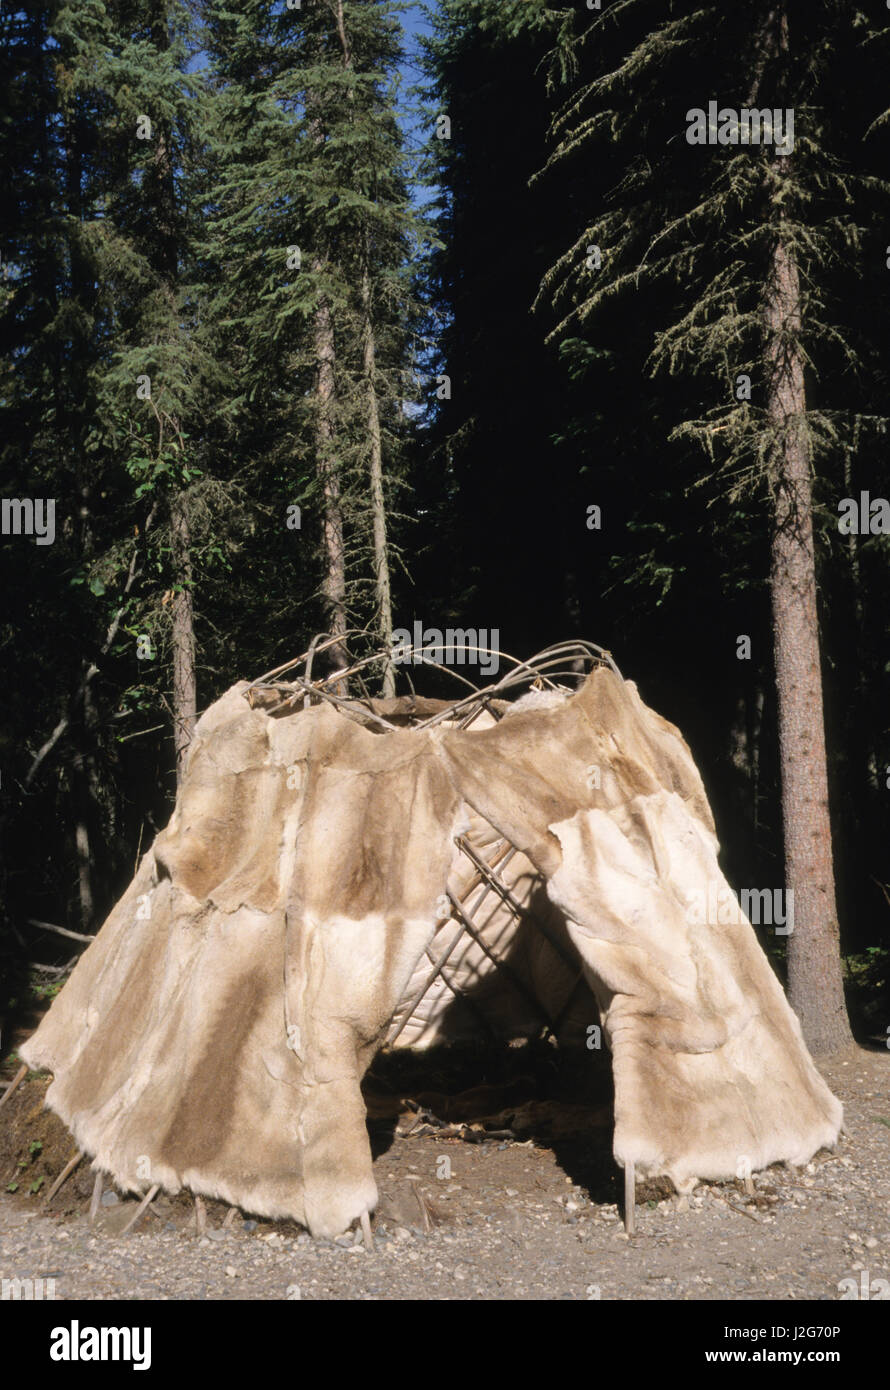 Traditional Athabaskan dome shaped dwelling covered with caribou hides called a wickiup used mainly during hunts. Chena Village, Alaska (PR) Stock Photo